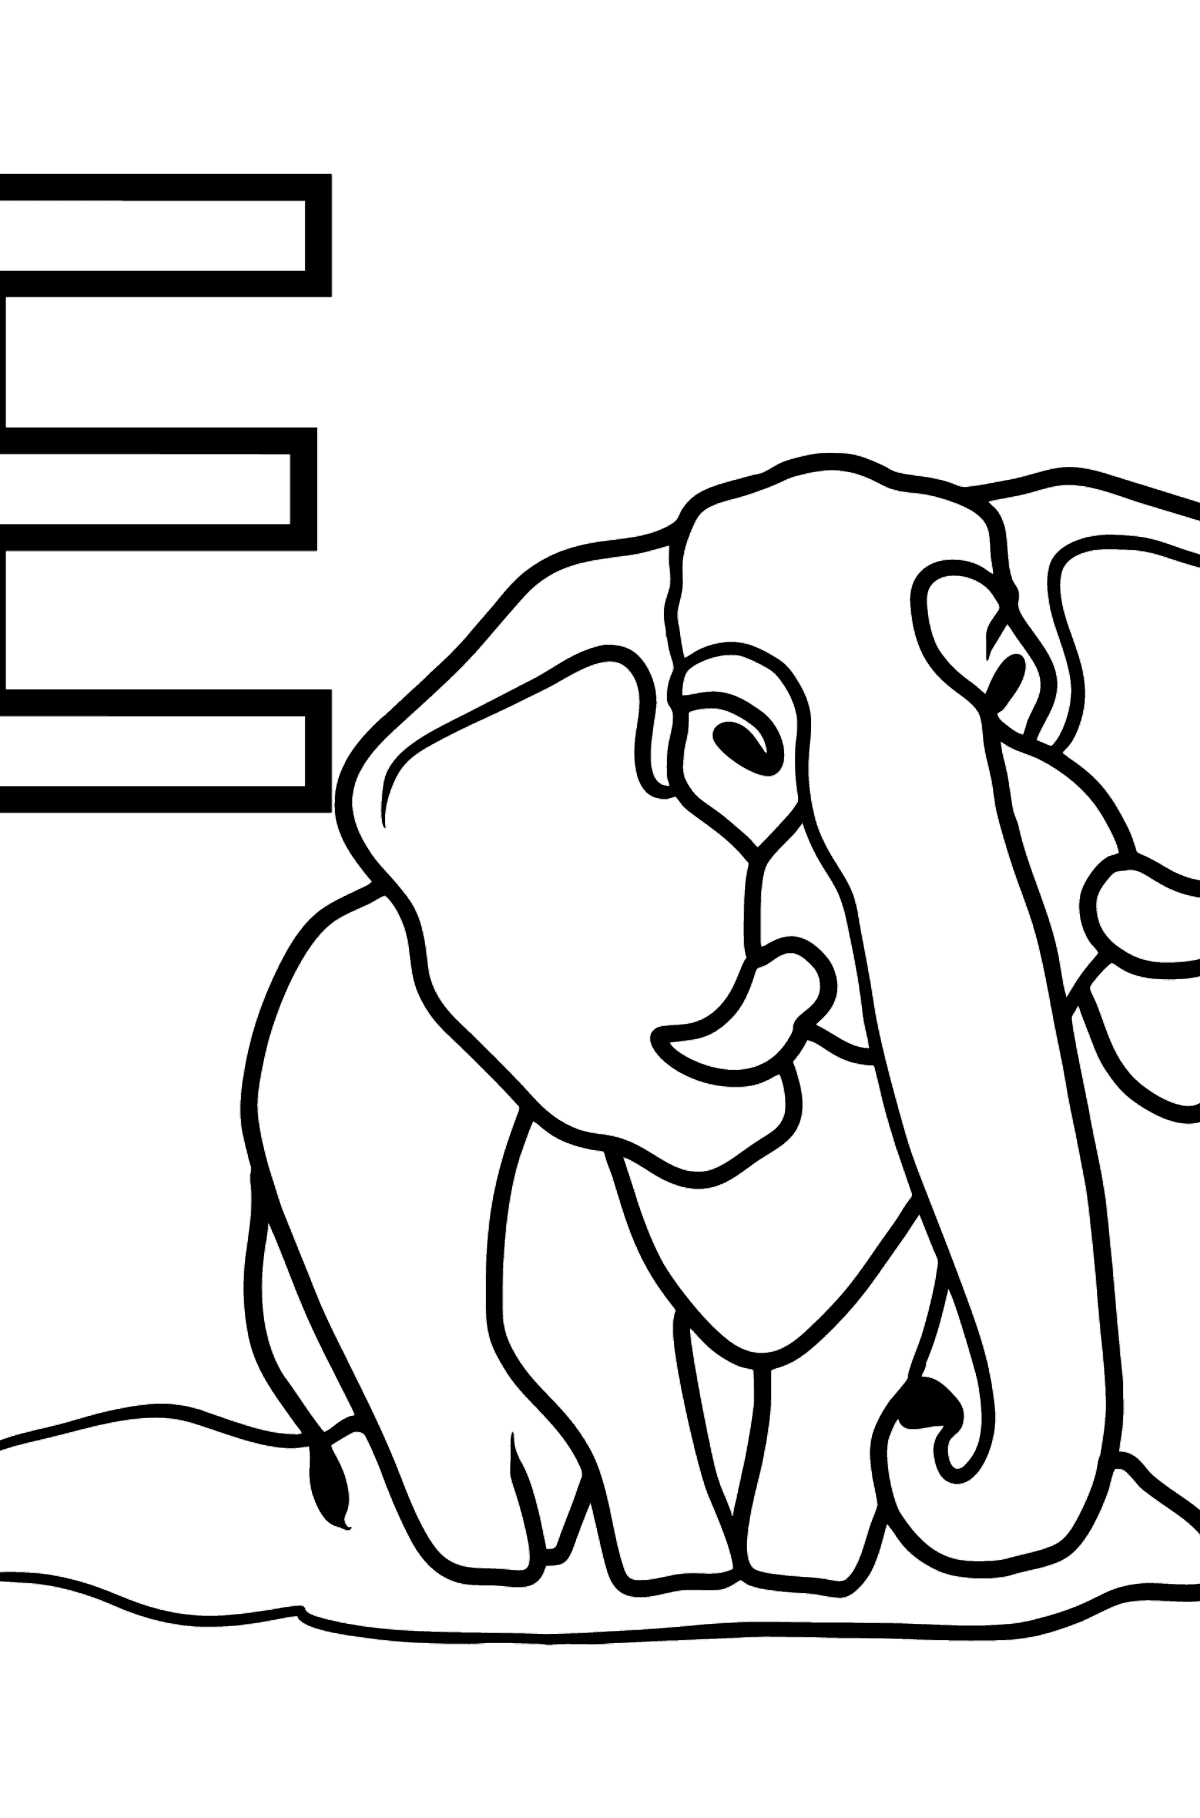 French Letter E coloring pages - ÉLÉPHANT - Coloring Pages for Kids